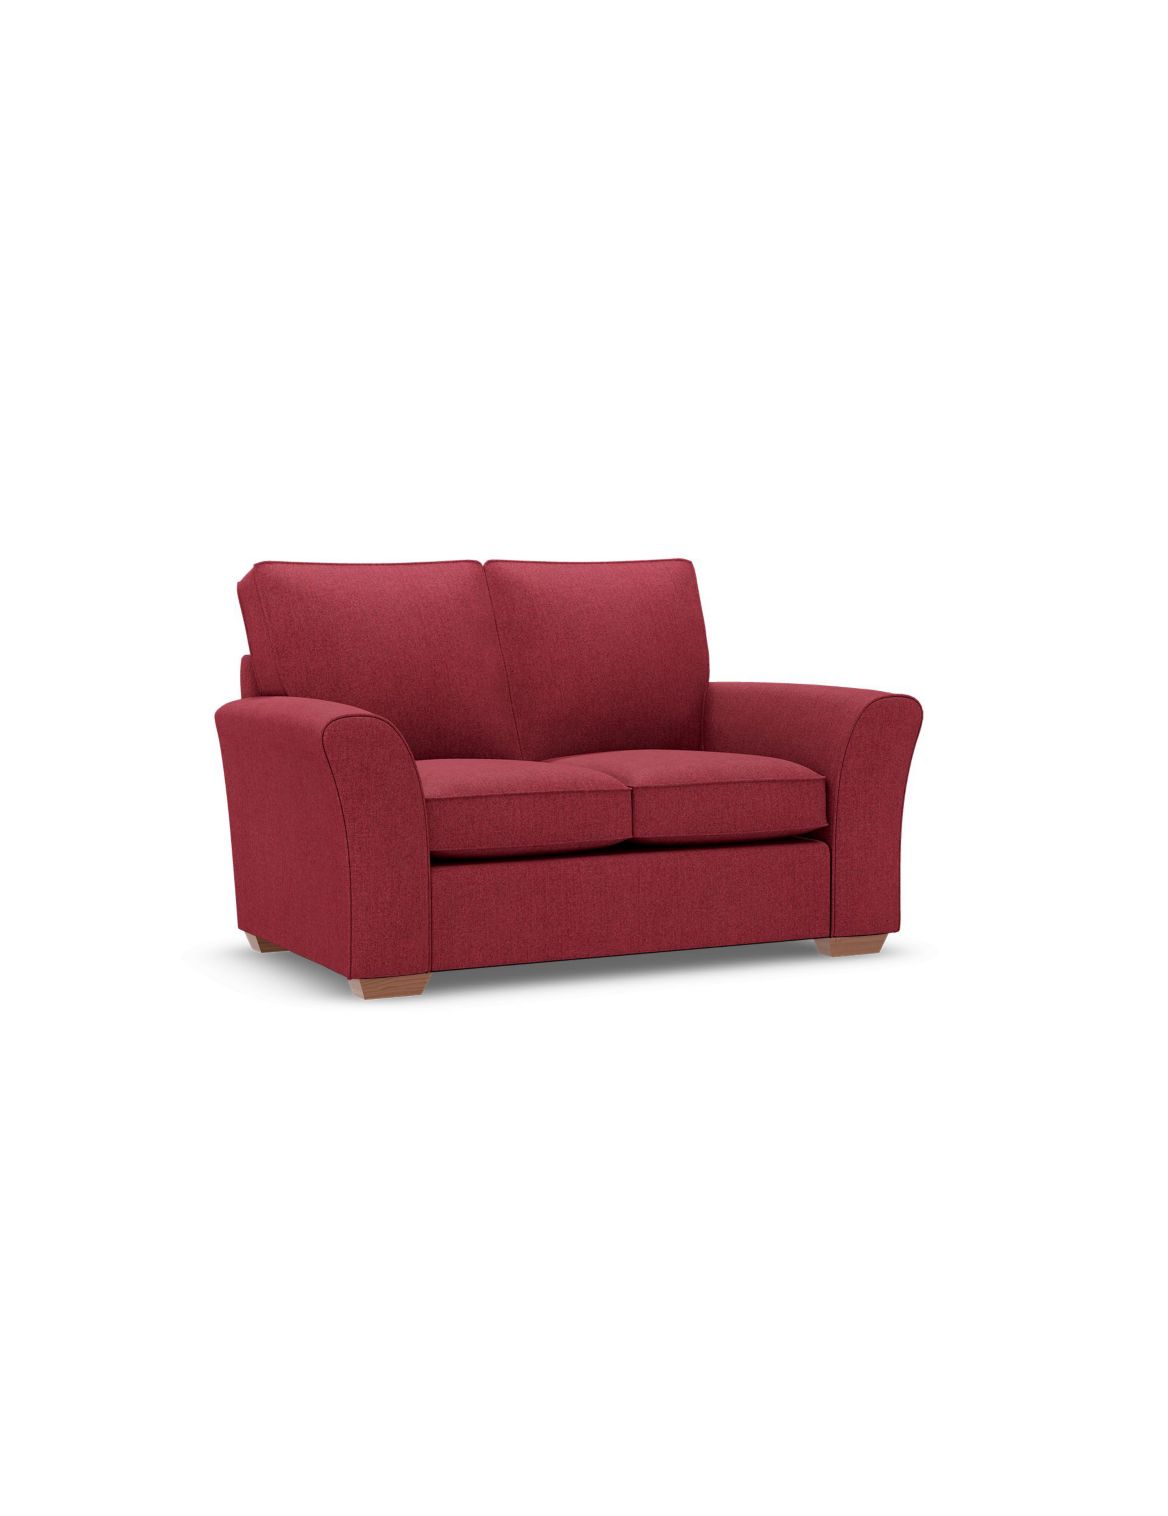 Lincoln Compact Sofa red